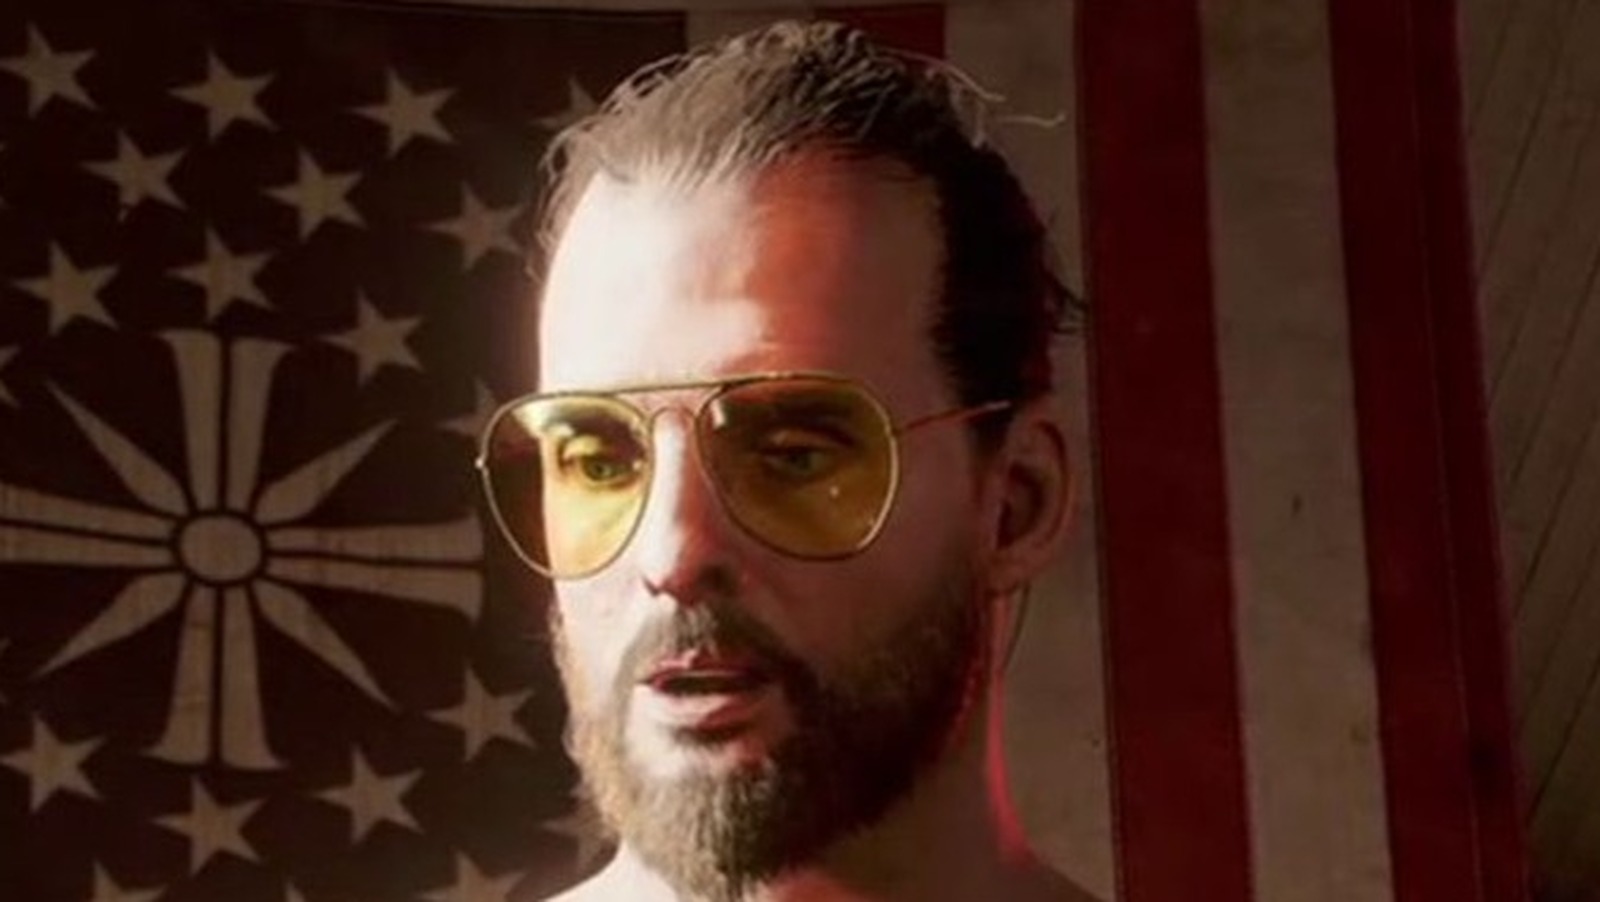 Is Far Cry 5 Cross Platform Or Cross-Play In 2023? - Tech Zwn